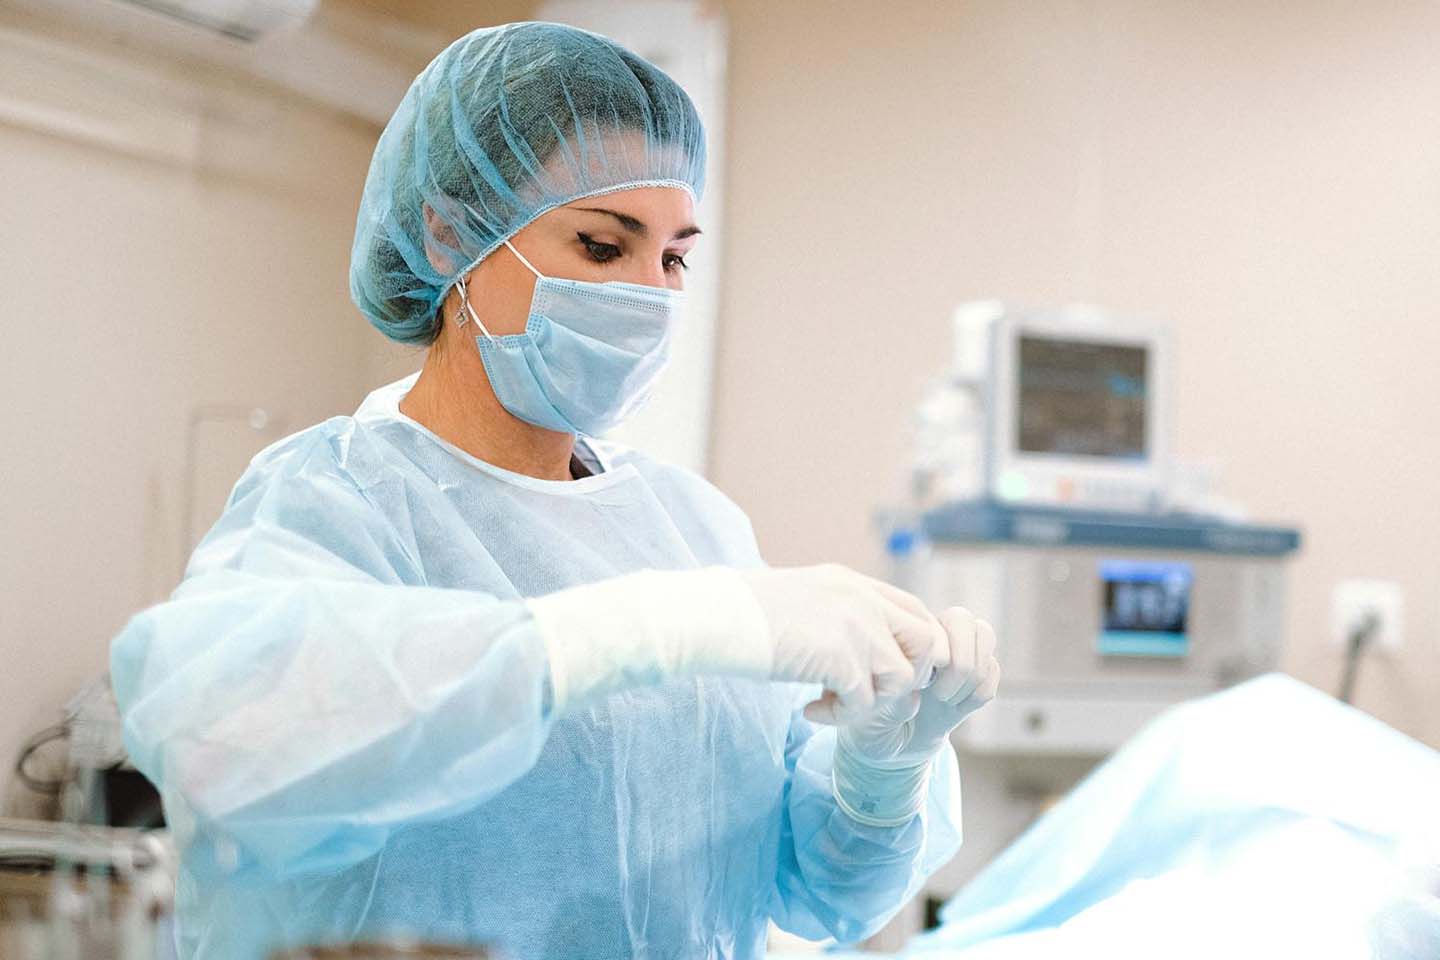 A surgeon preparing for an operation and wearing a sterile surgical gown, cap and sterile gloves.